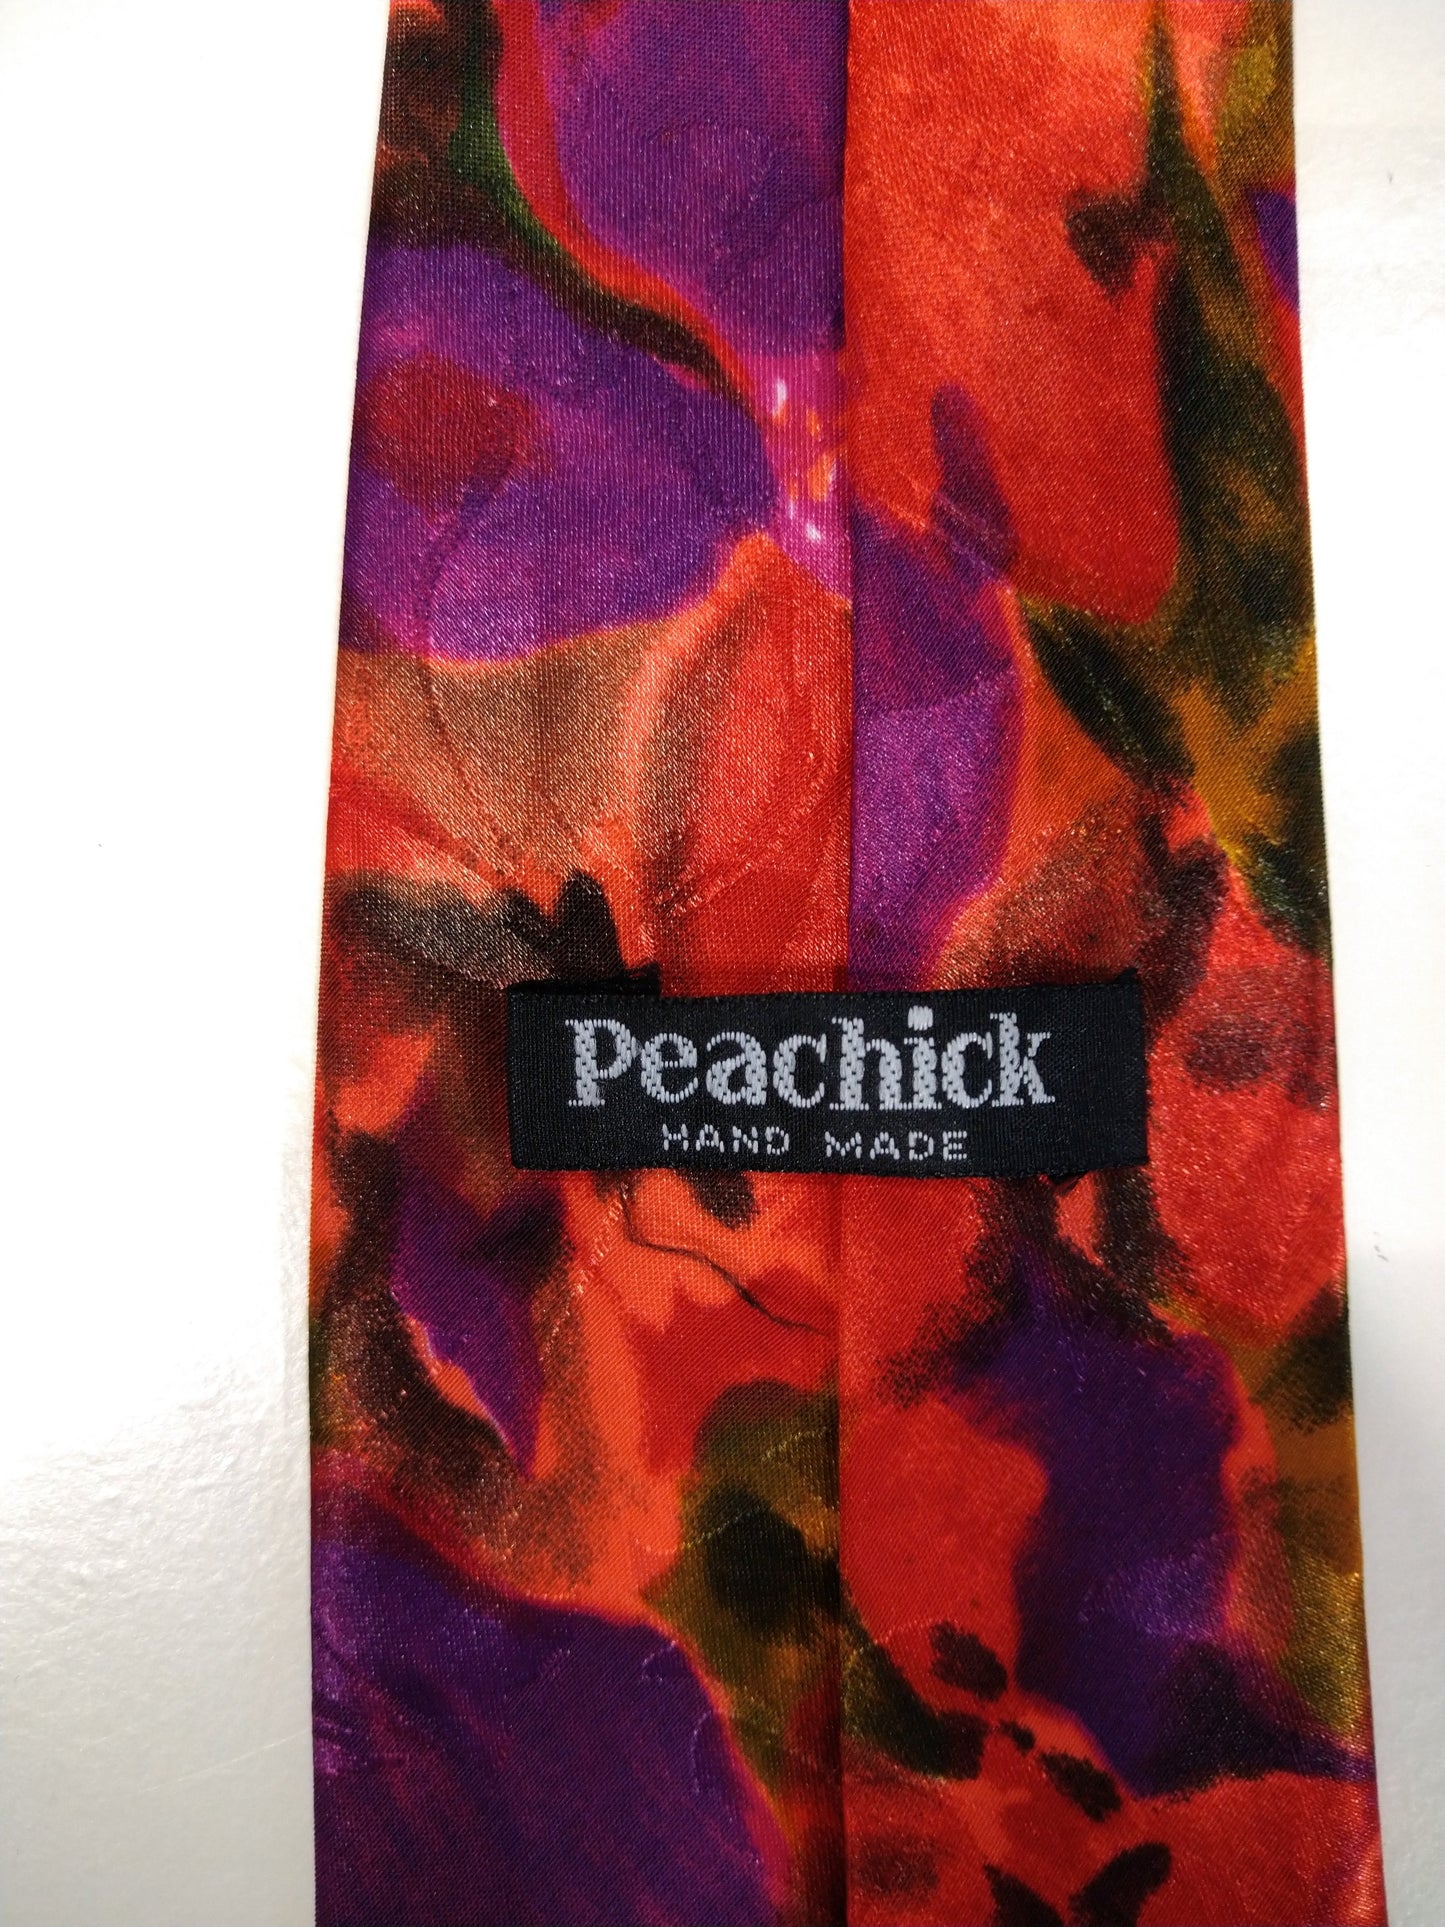 Peachick hand made polyester tie. Beautiful floral motif with separate metallic shine.